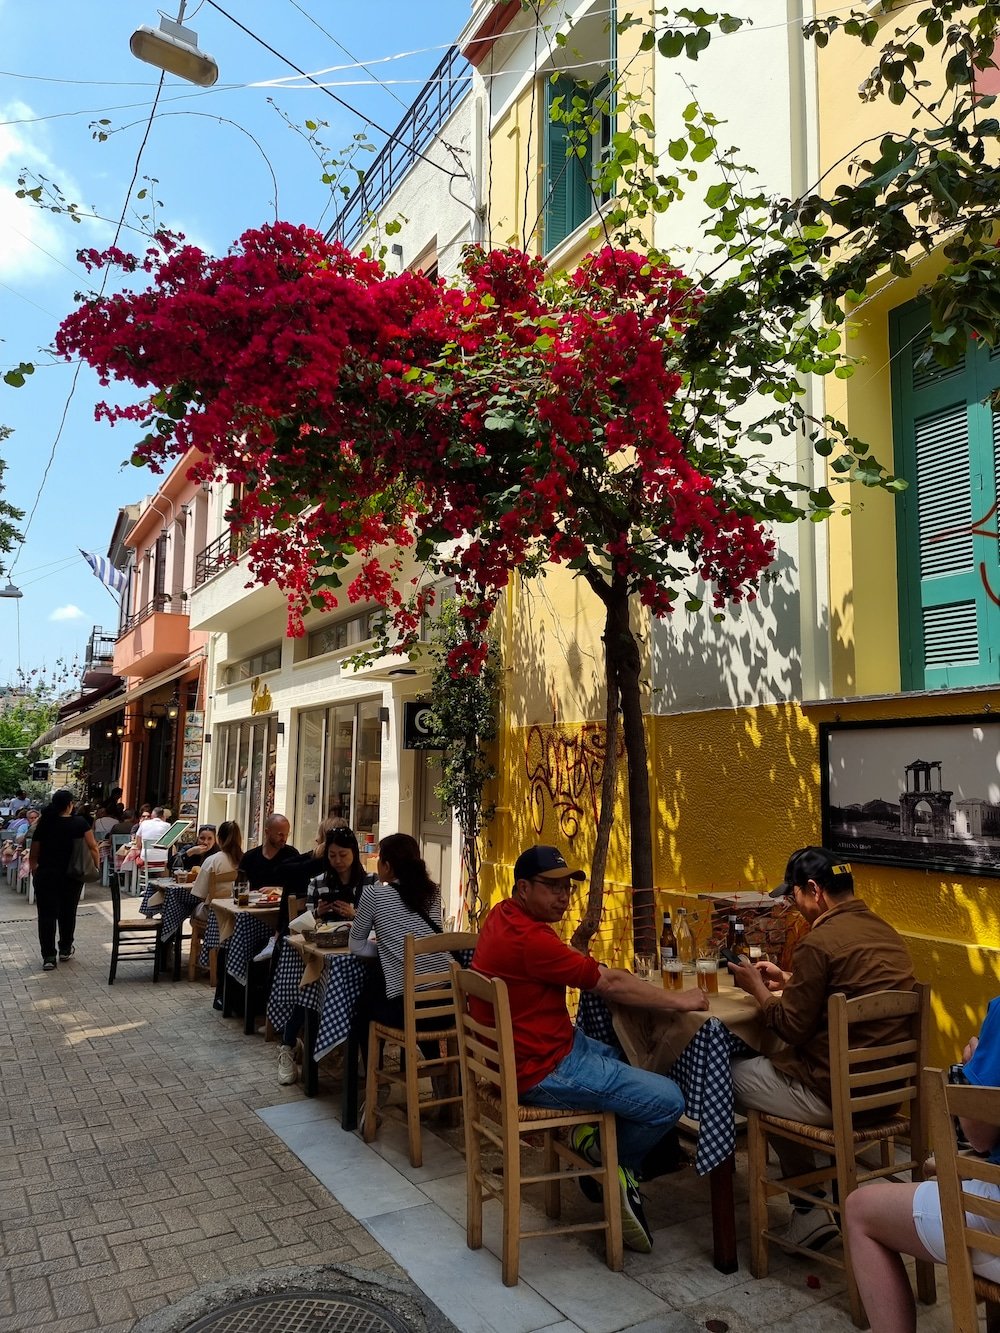 10 days in Greece - Athens streets